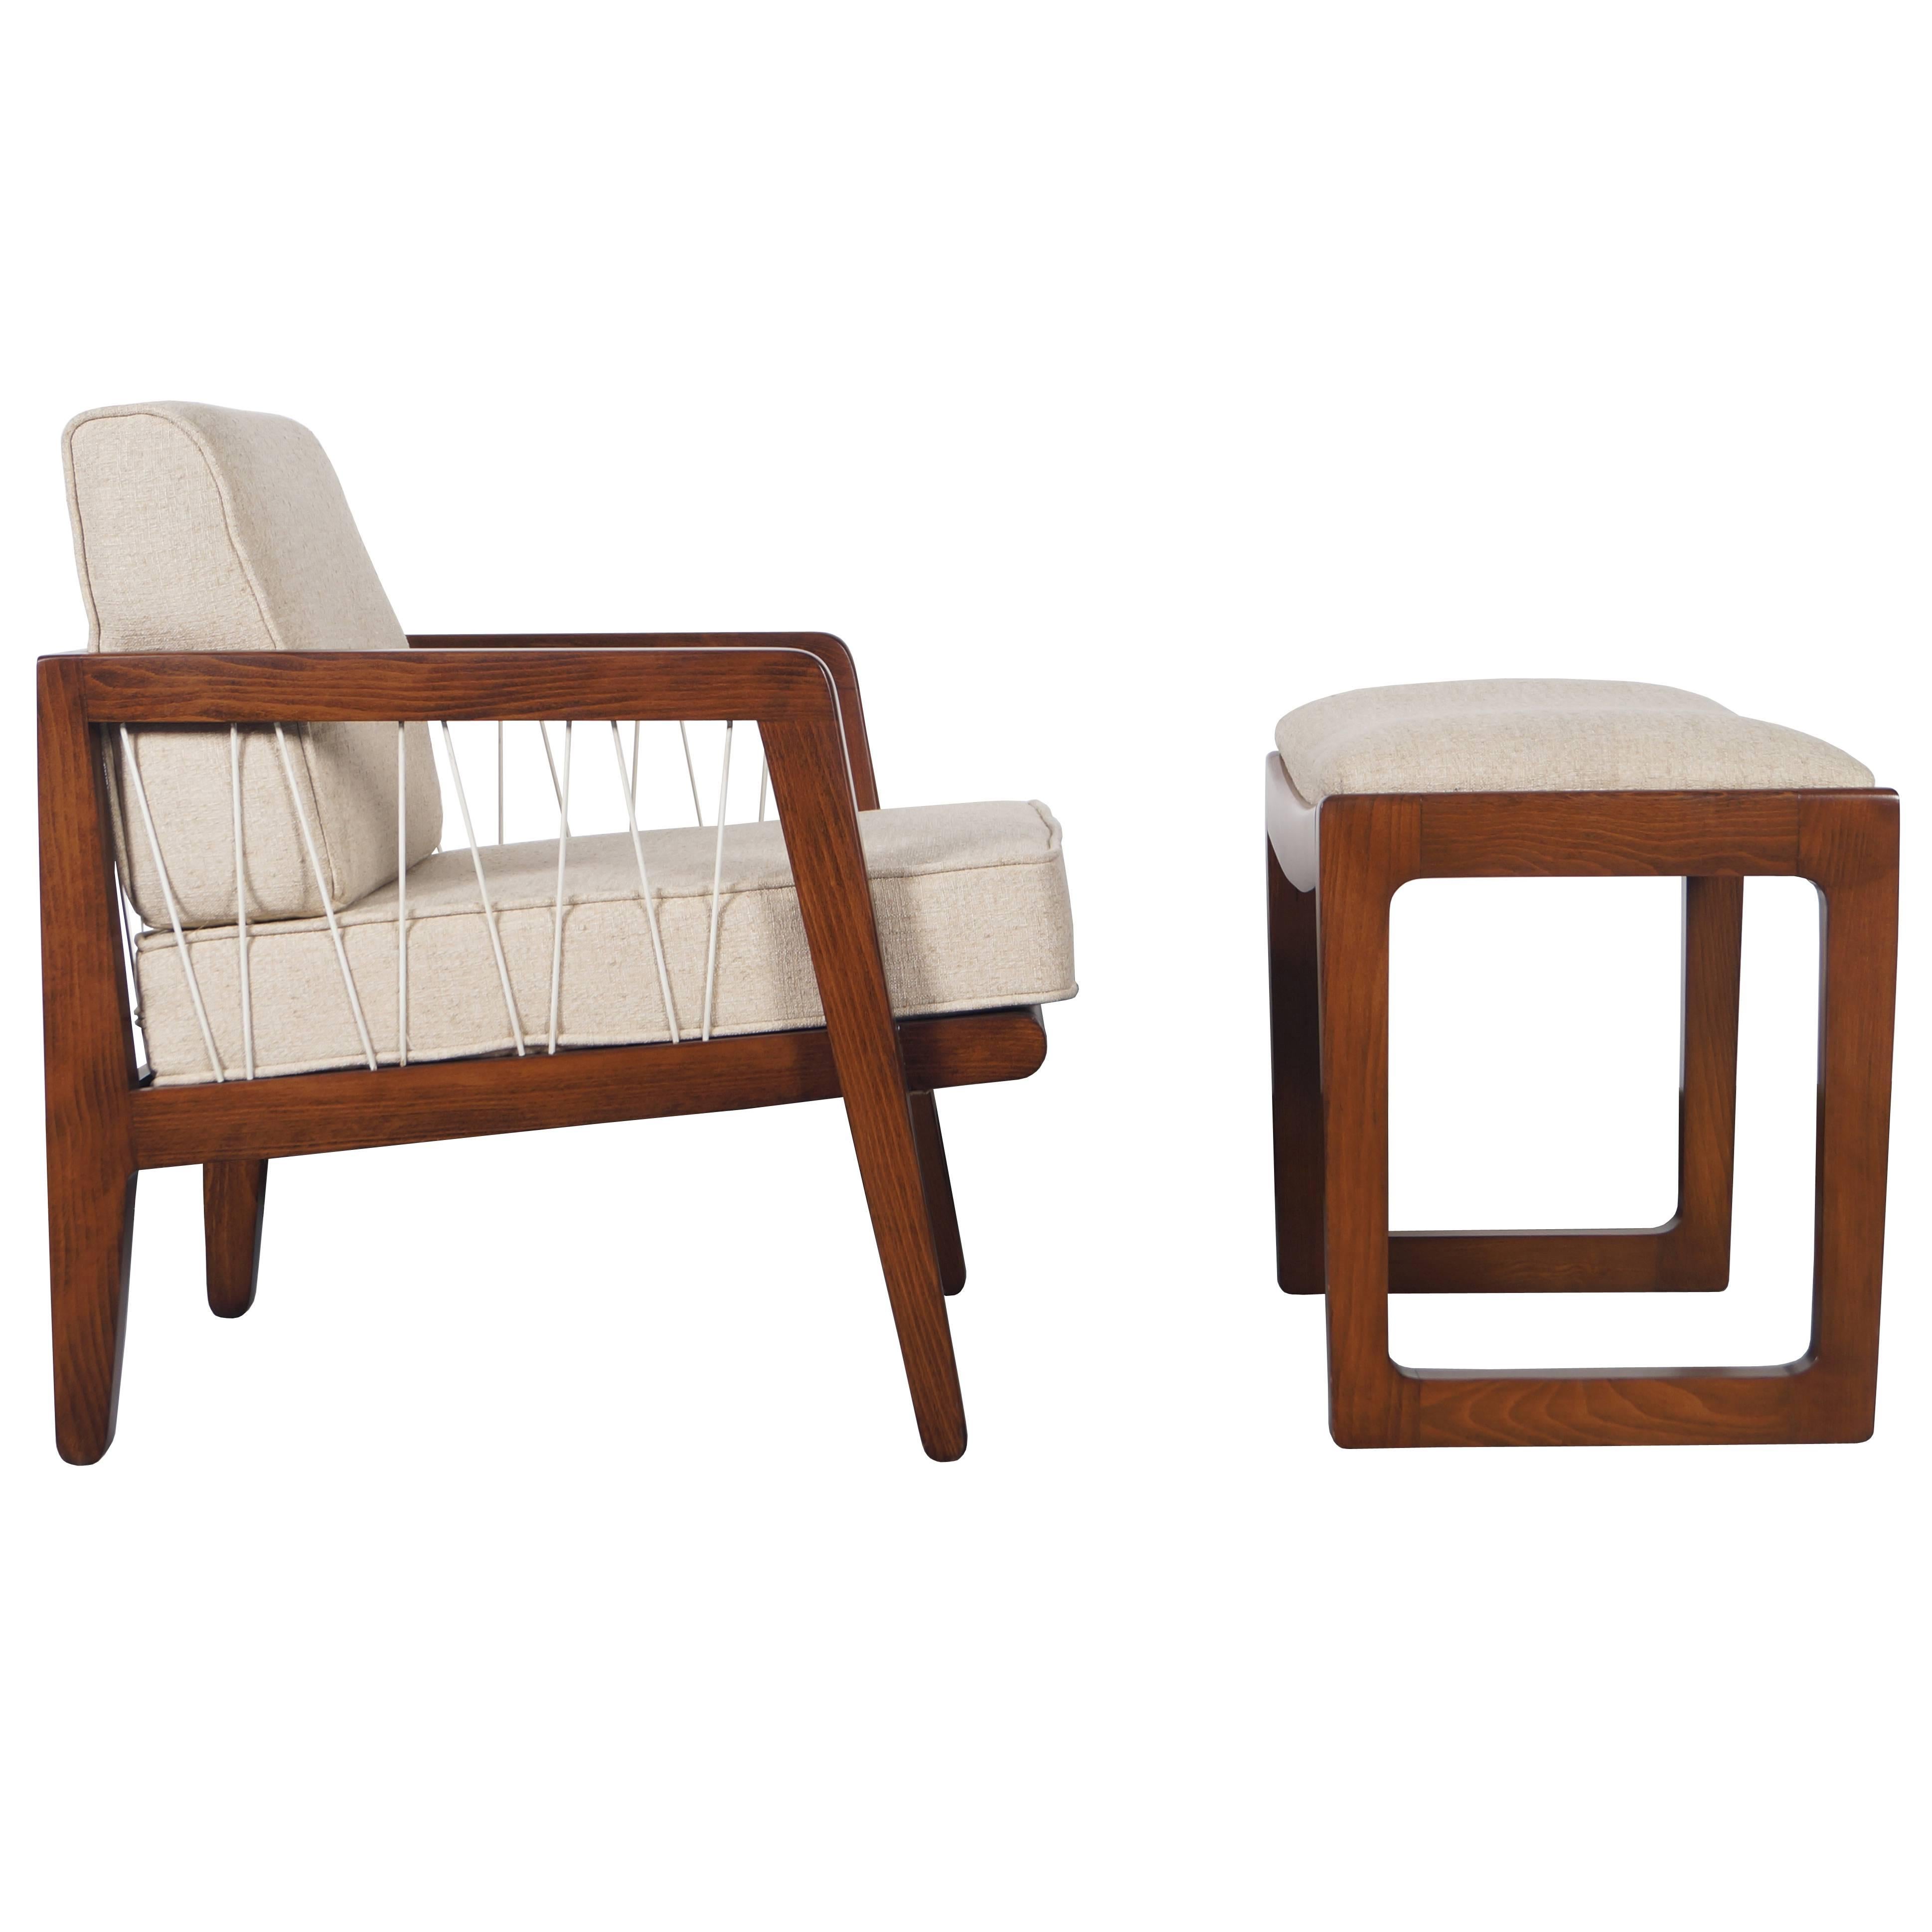 Vintage Drexel "Precedent" Lounge Chair and Ottoman by Edward Wormley